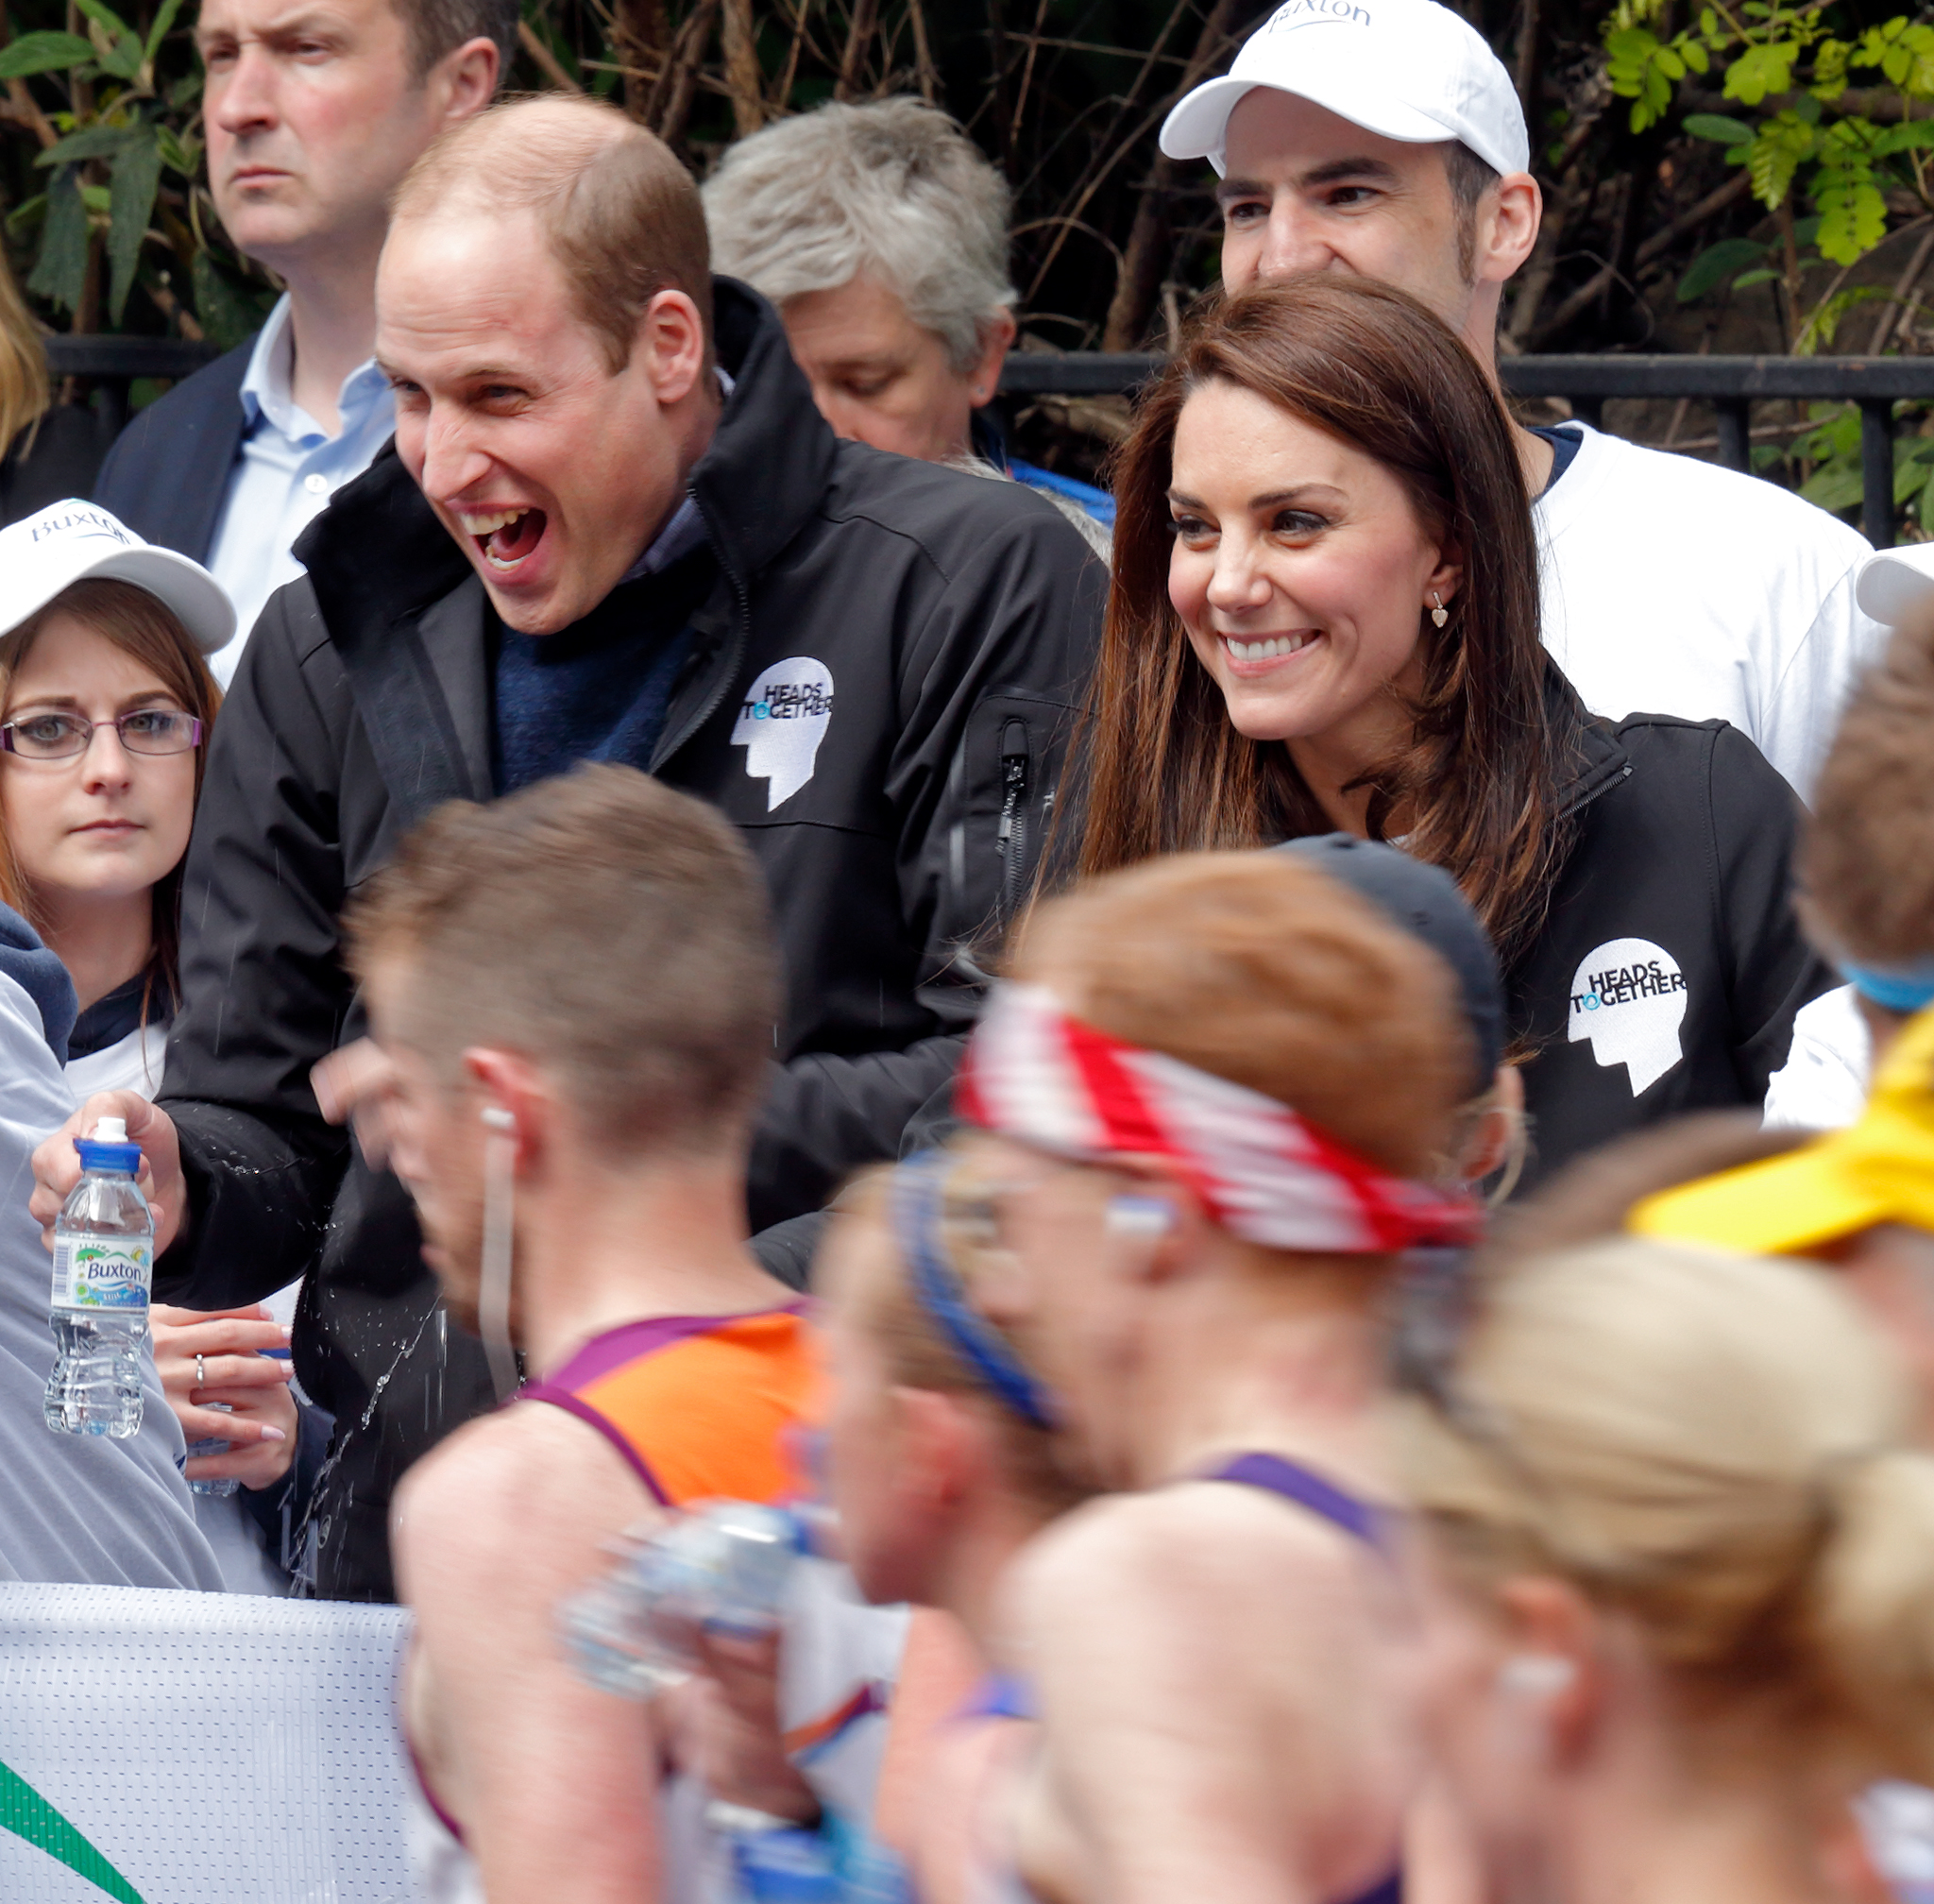 LONDON, UNITED KINGDOM - APRIL 23: (EMBARGOED FOR PUBLICATION IN UK NEWSPAPERS UNTIL 48 HOURS AFTER CREATE DATE AND TIME) Prince William, Duke of Cambridge is squirted with water as he & Catherine, Duchess of Cambridge hand out water to runners taking part in the 2017 Virgin Money London Marathon on April 23, 2017 in London, England. The Heads Together mental heath campaign, spearheaded by The Duke & Duchess of Cambridge and Prince Harry, is the marathon's 2017 Charity of the Year. (Photo by Max Mumby/Indigo/Getty Images) (Max Mumby—Getty Images)